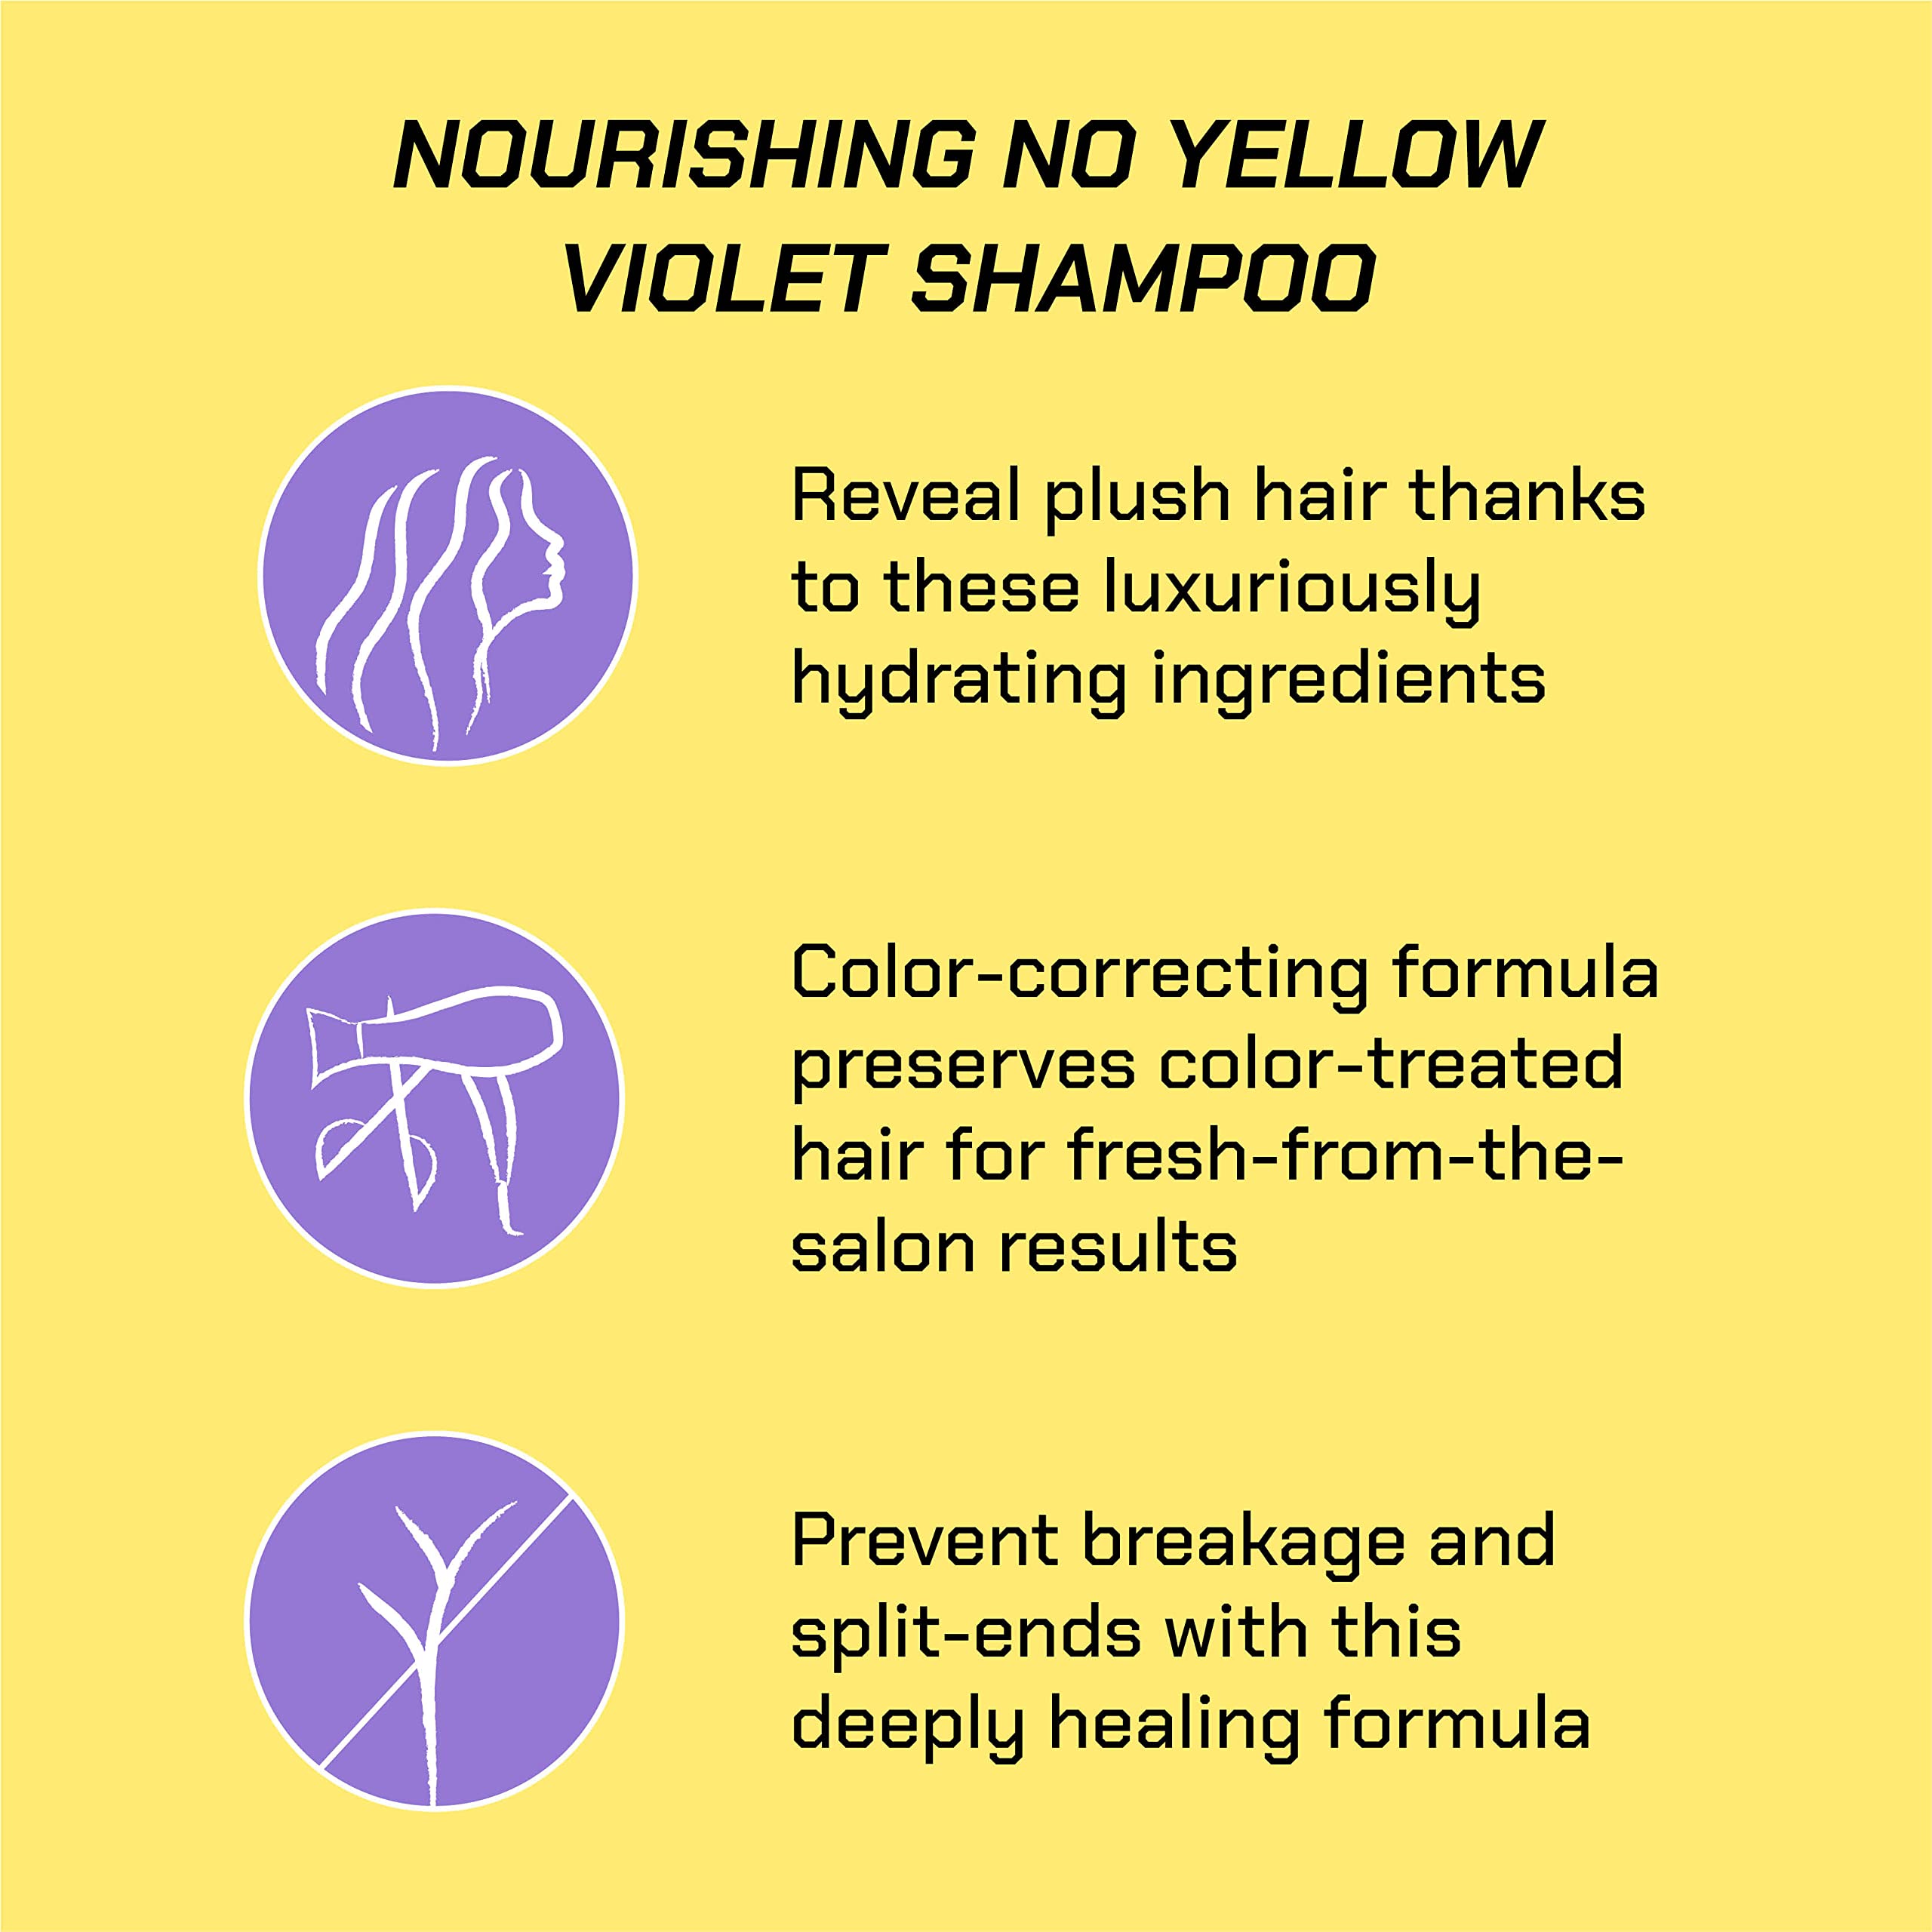 NOW BEAUTY Nourishing No Yellow Violet Shampoo - Purple Toner Shampoo To Reduce Brassiness, Enhance Shine And Strength - Hydrate And Renew Color-Treated Hair - Paraben And Sulfate Free - 32 Oz